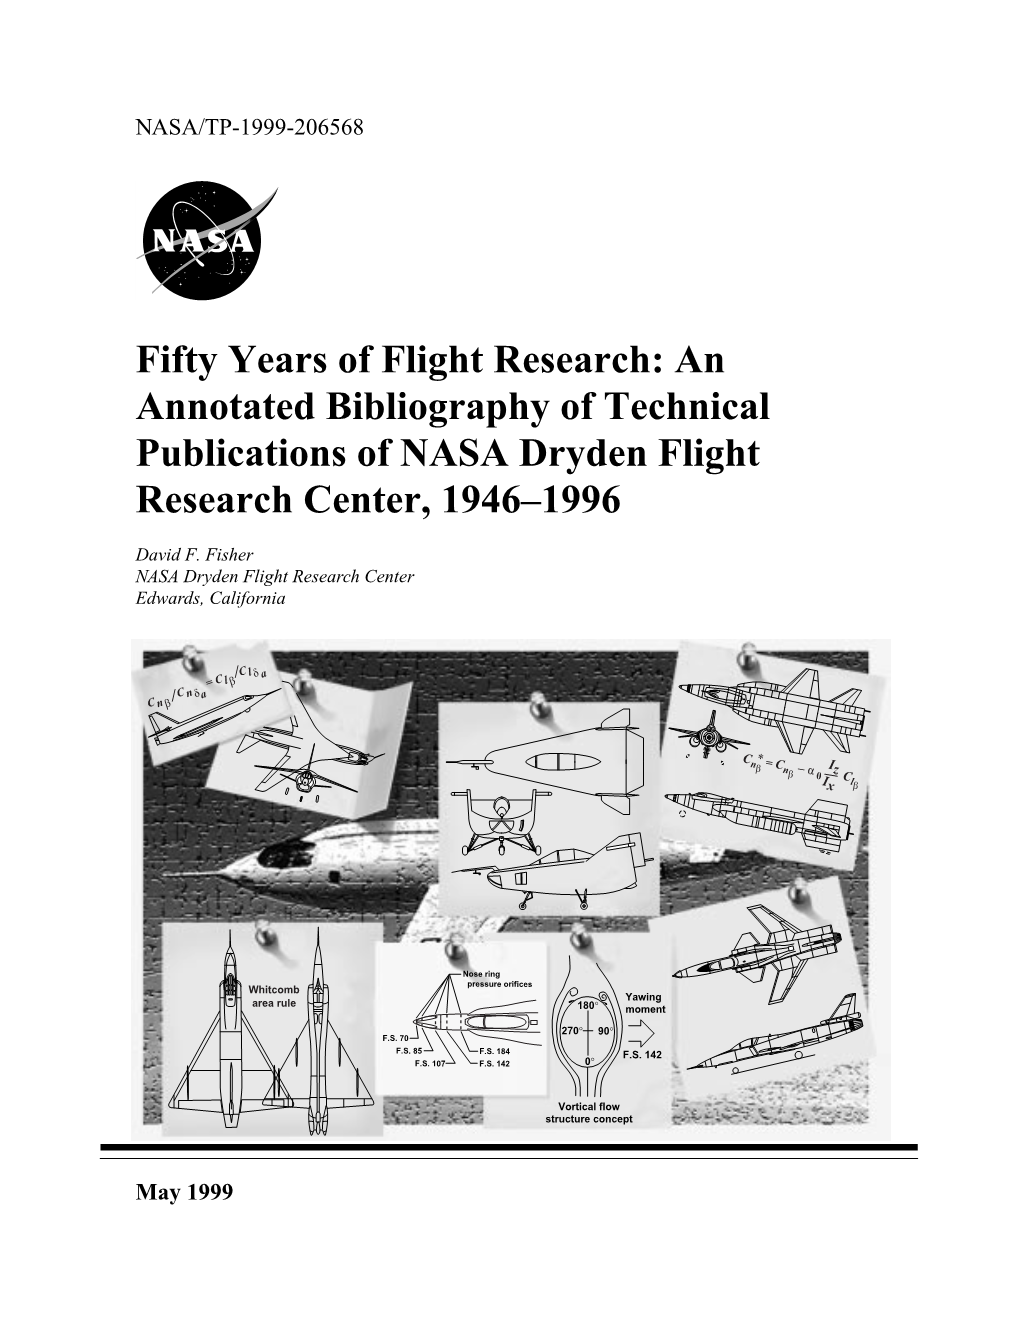 Fifty Years of Flight Research: an Annotated Bibliography of Technical Publications of NASA Dryden Flight Research Center, 1946Ð1996